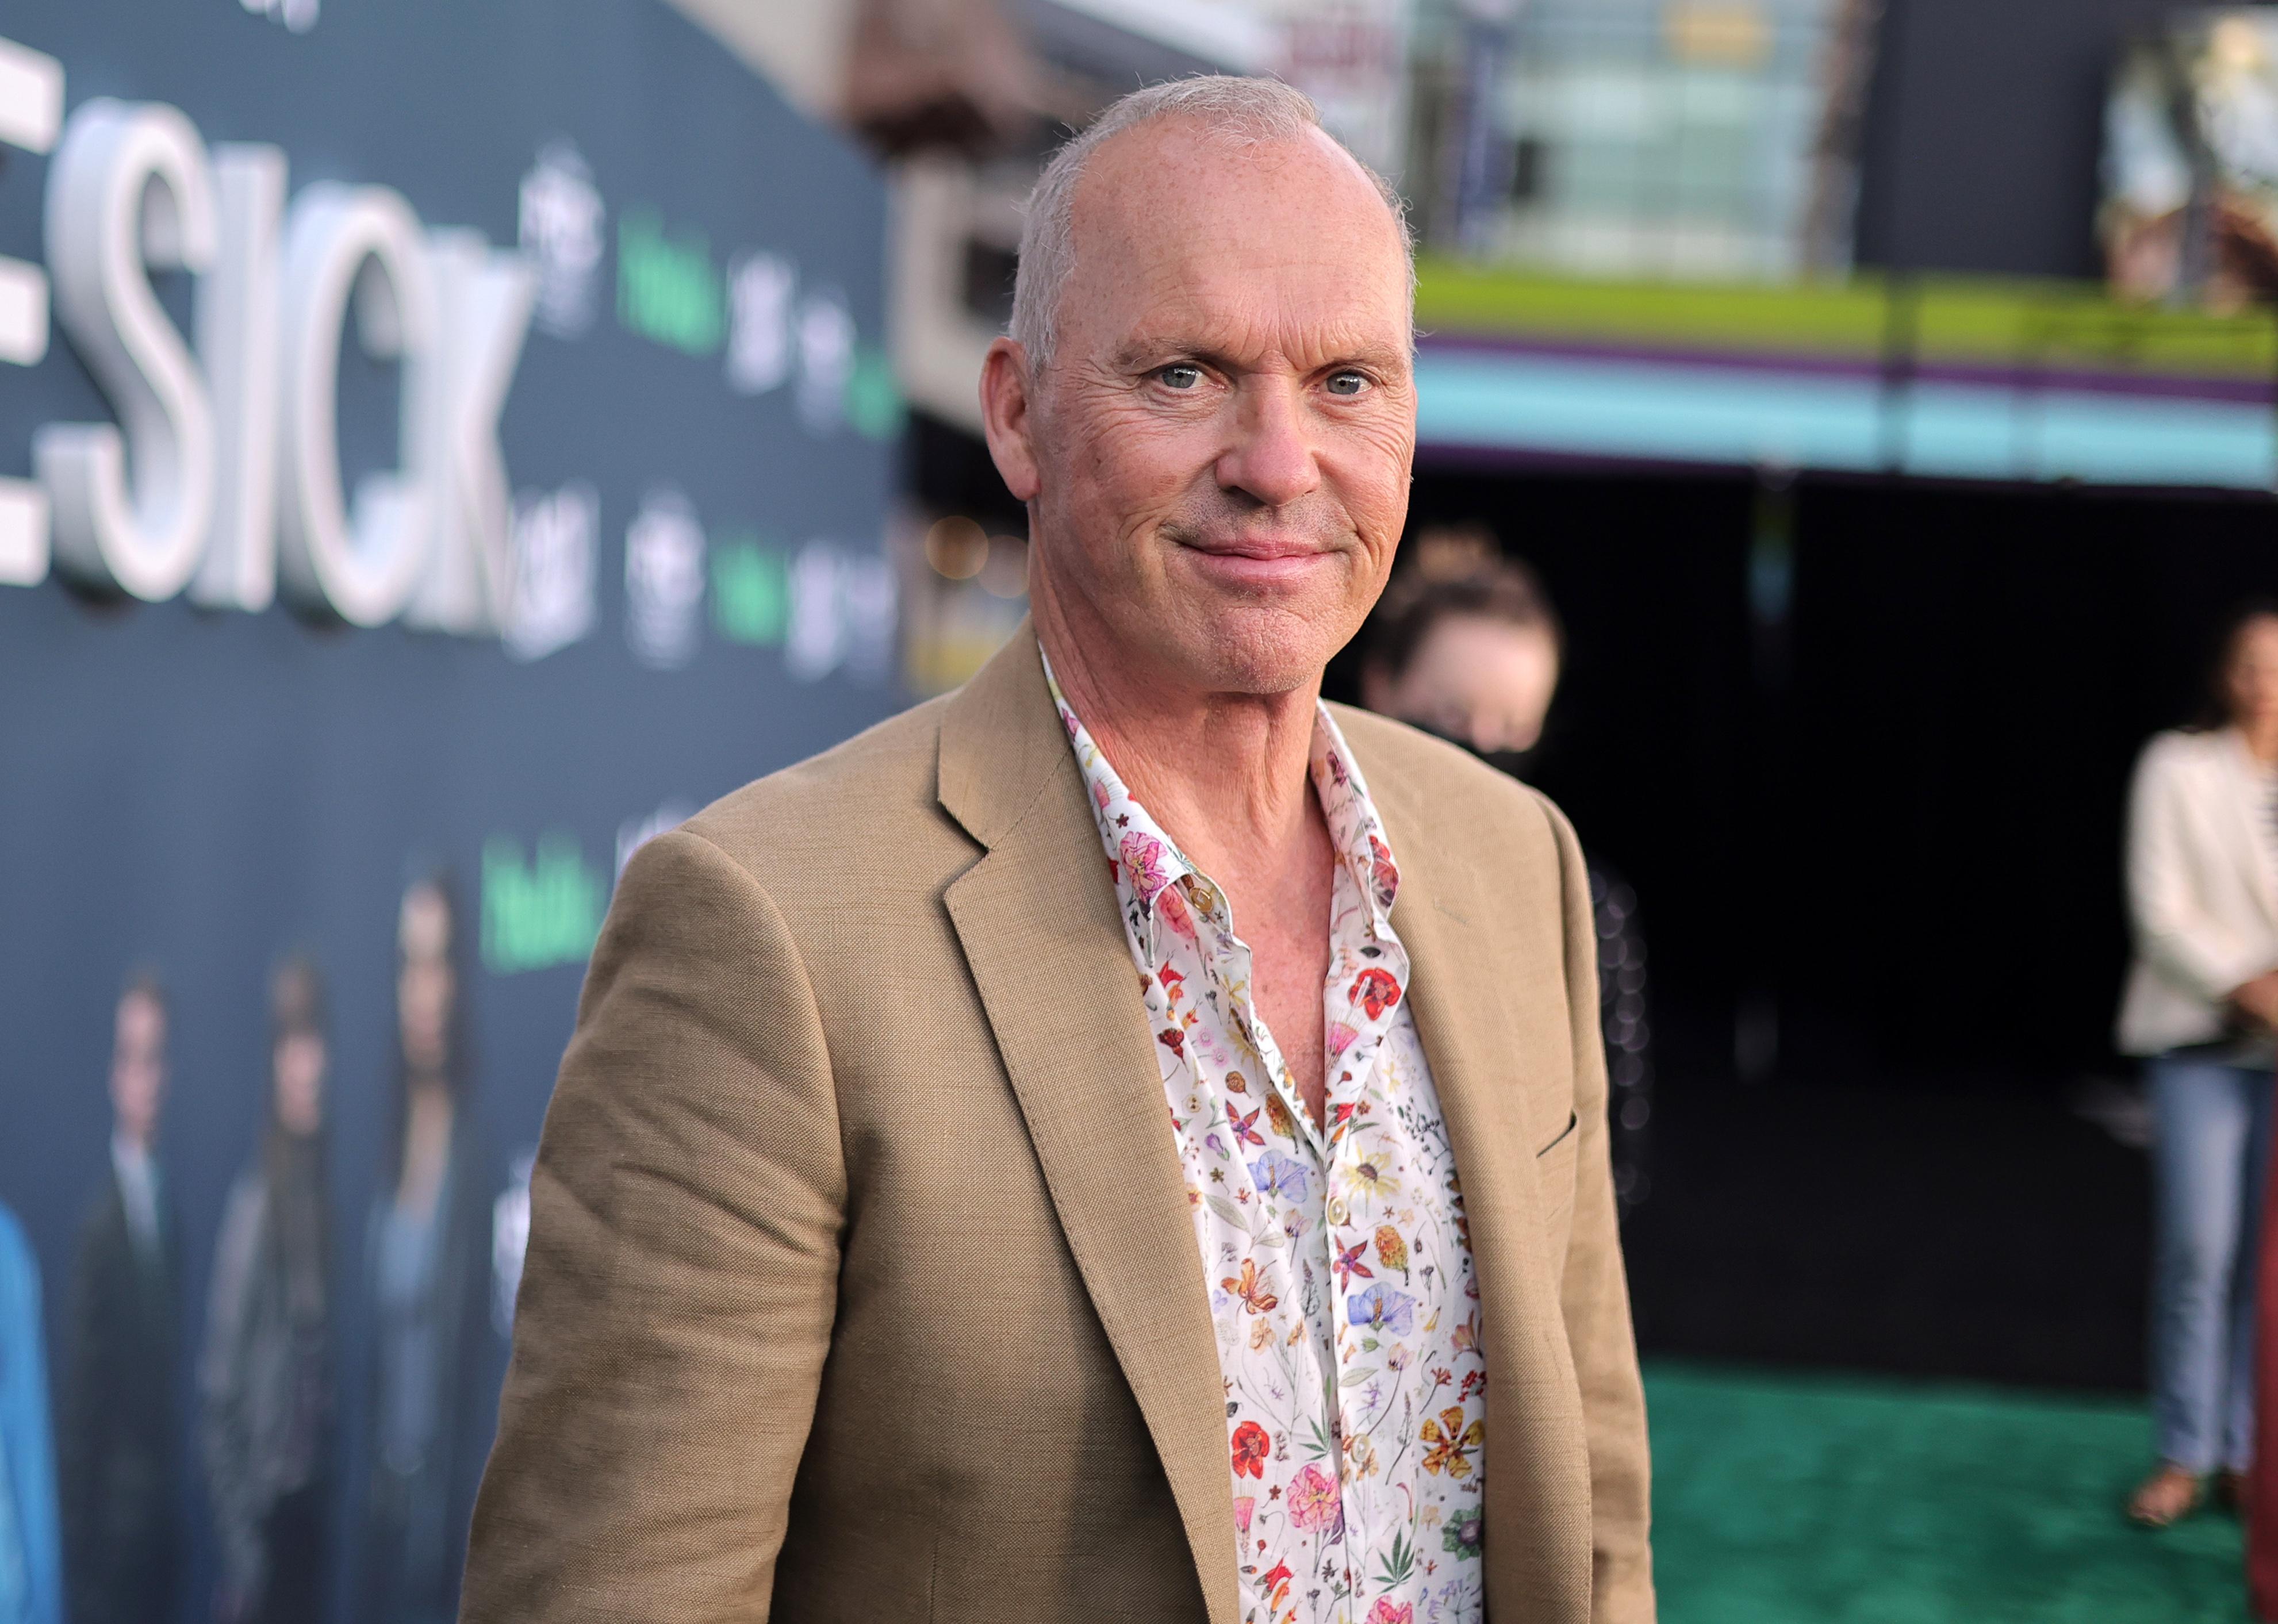 Michael Keaton attends the special screening and Q&A event for Hulu's "Dopesick".